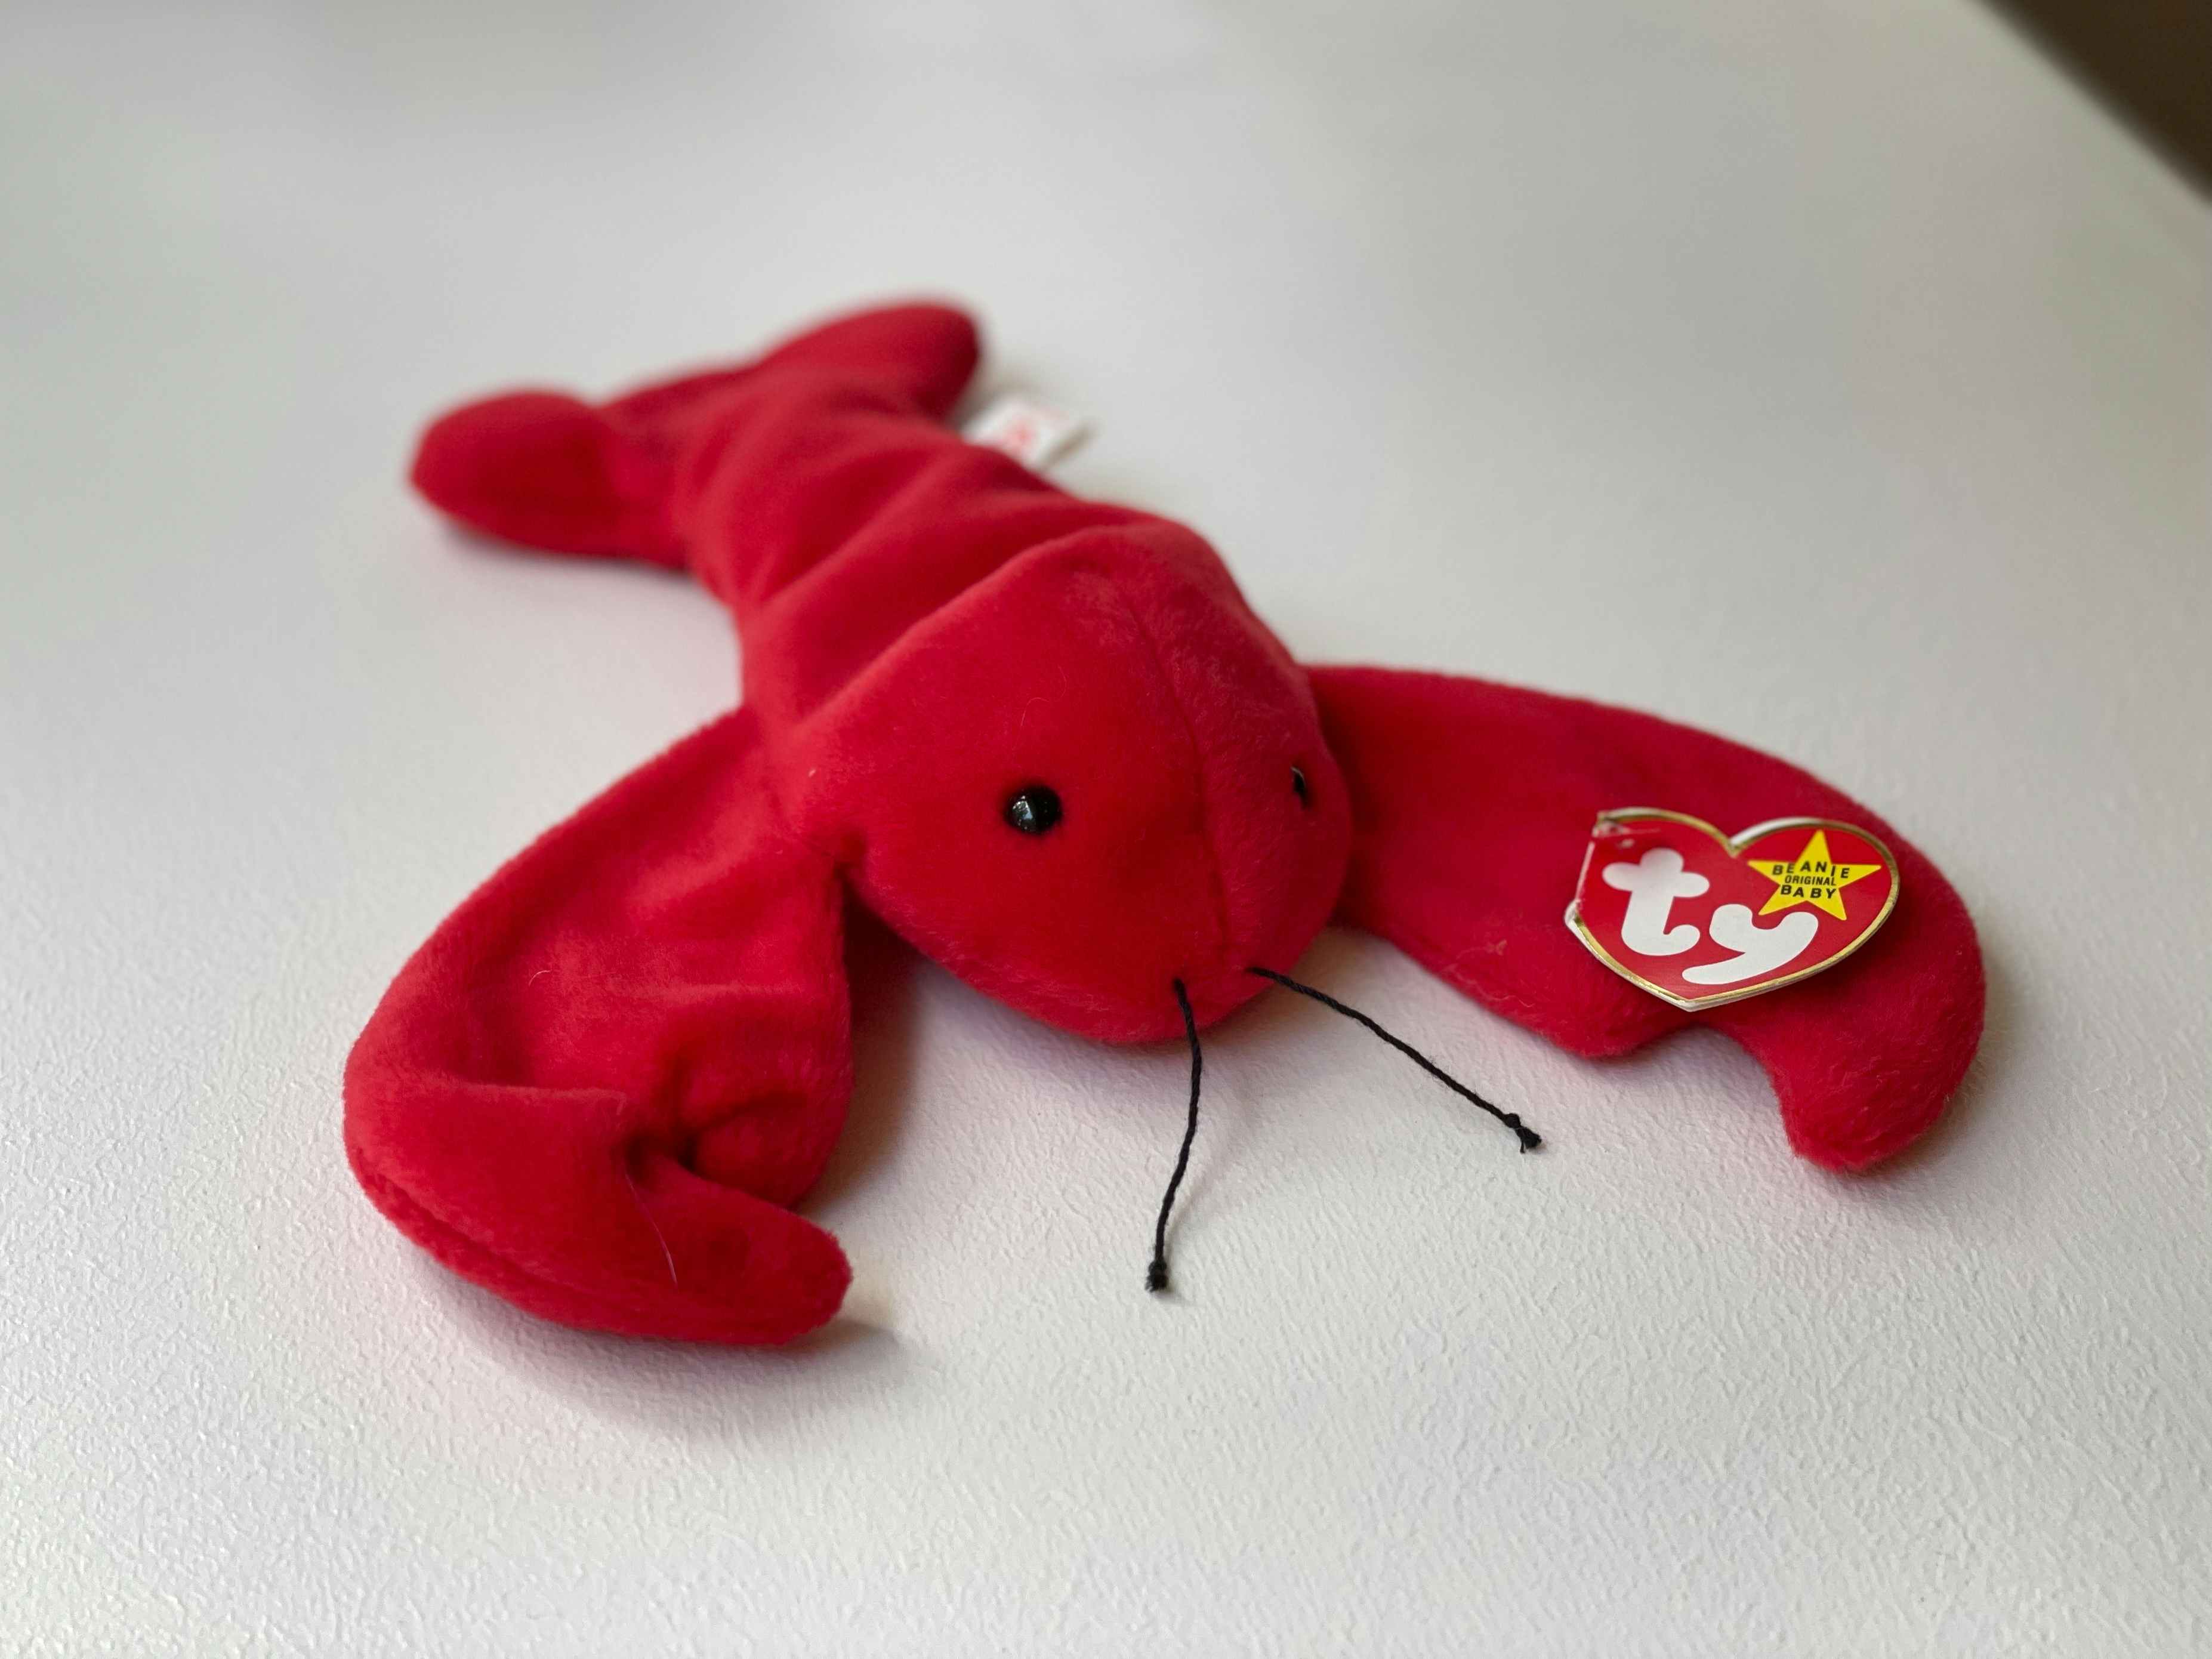 A Pinchers the Lobster beanie baby sitting on a white table.